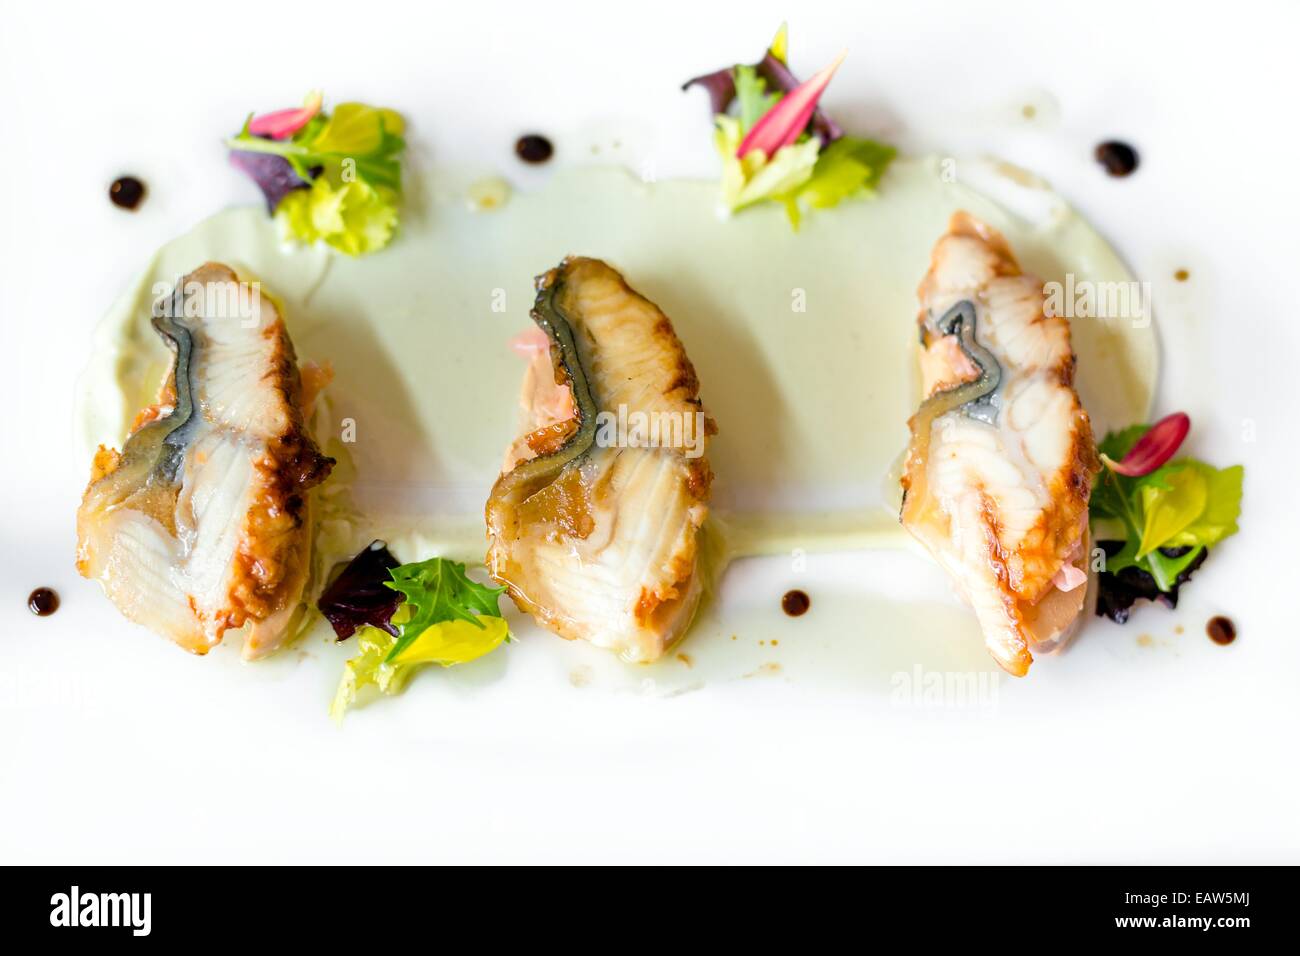 Appetizer food meal gourmet Cut Out Stock Images & Pictures - Alamy